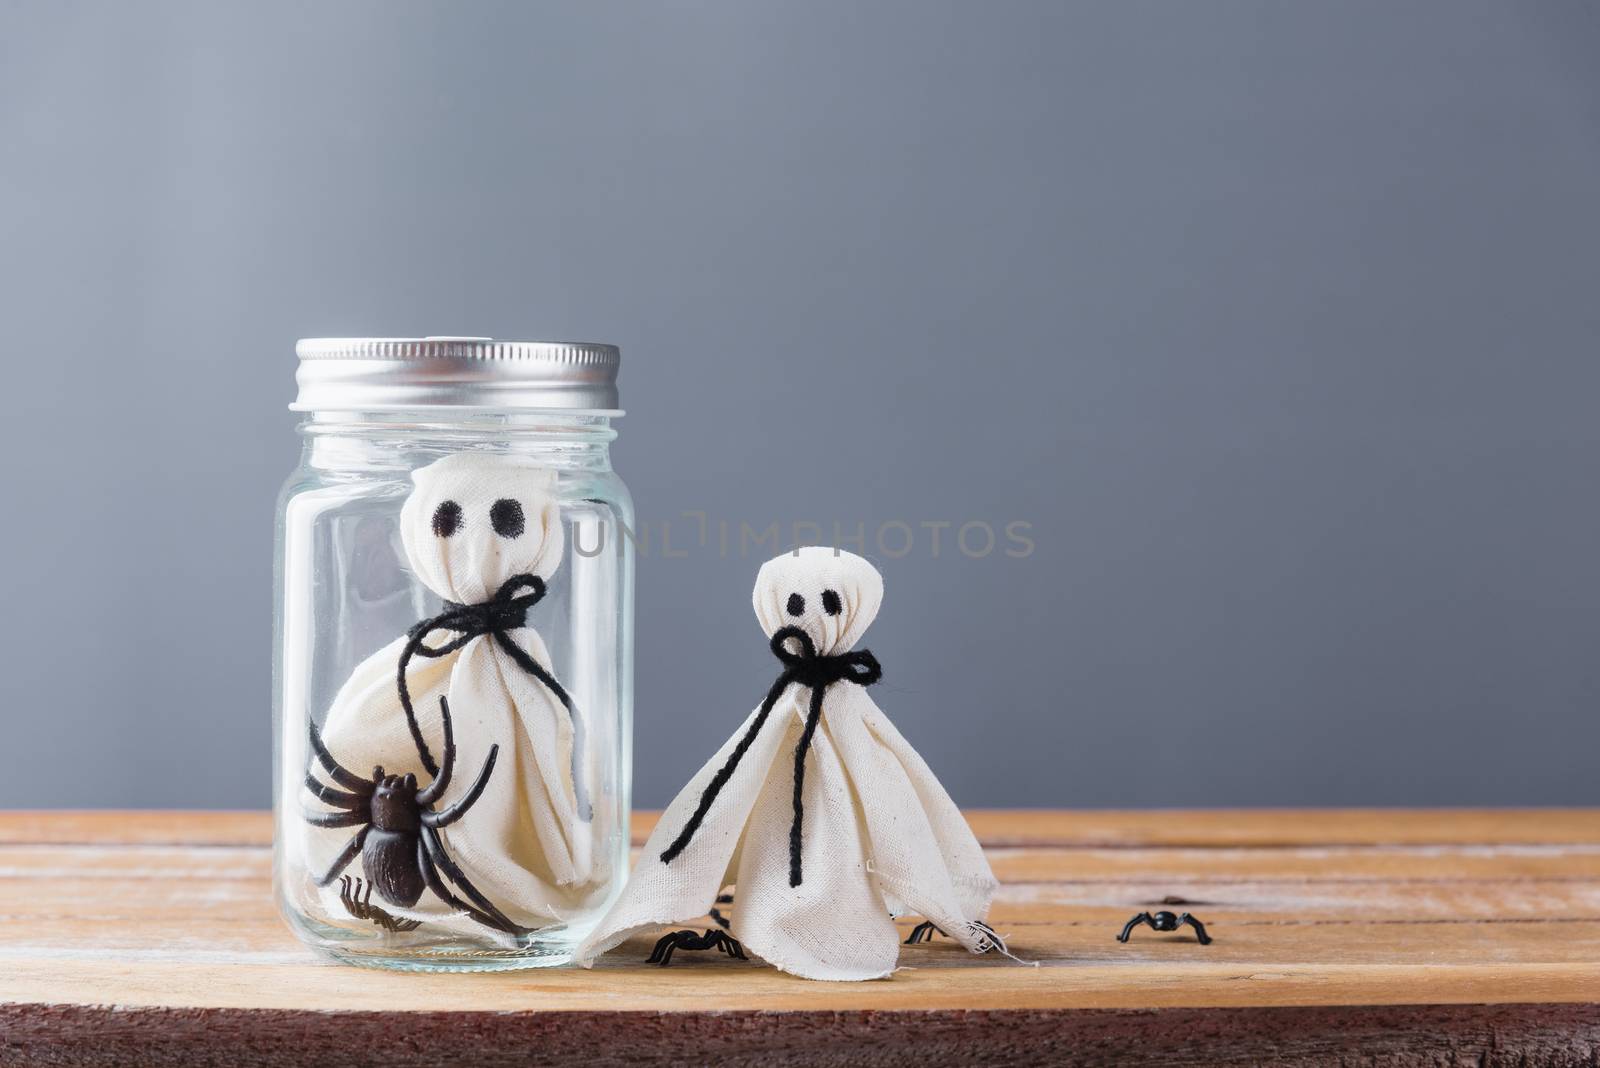 Funny Halloween day decoration party, closeup white ghost and spider in jar on wooden wall gray background and copy space, studio shot isolated, Happy holiday concept